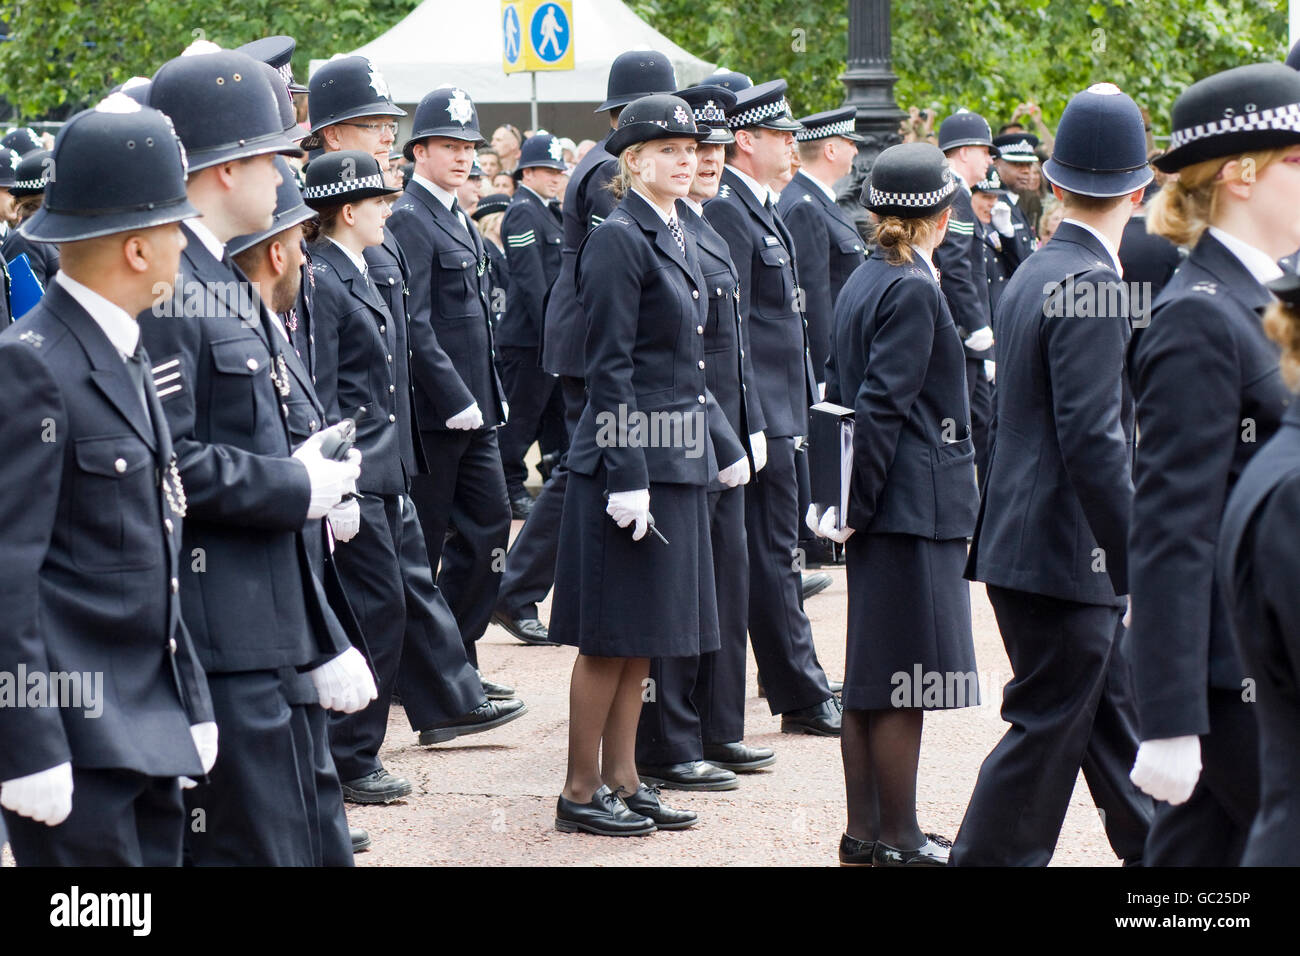 Parade of the Metropolitan Police Officers on the Mall London England Stock Photo